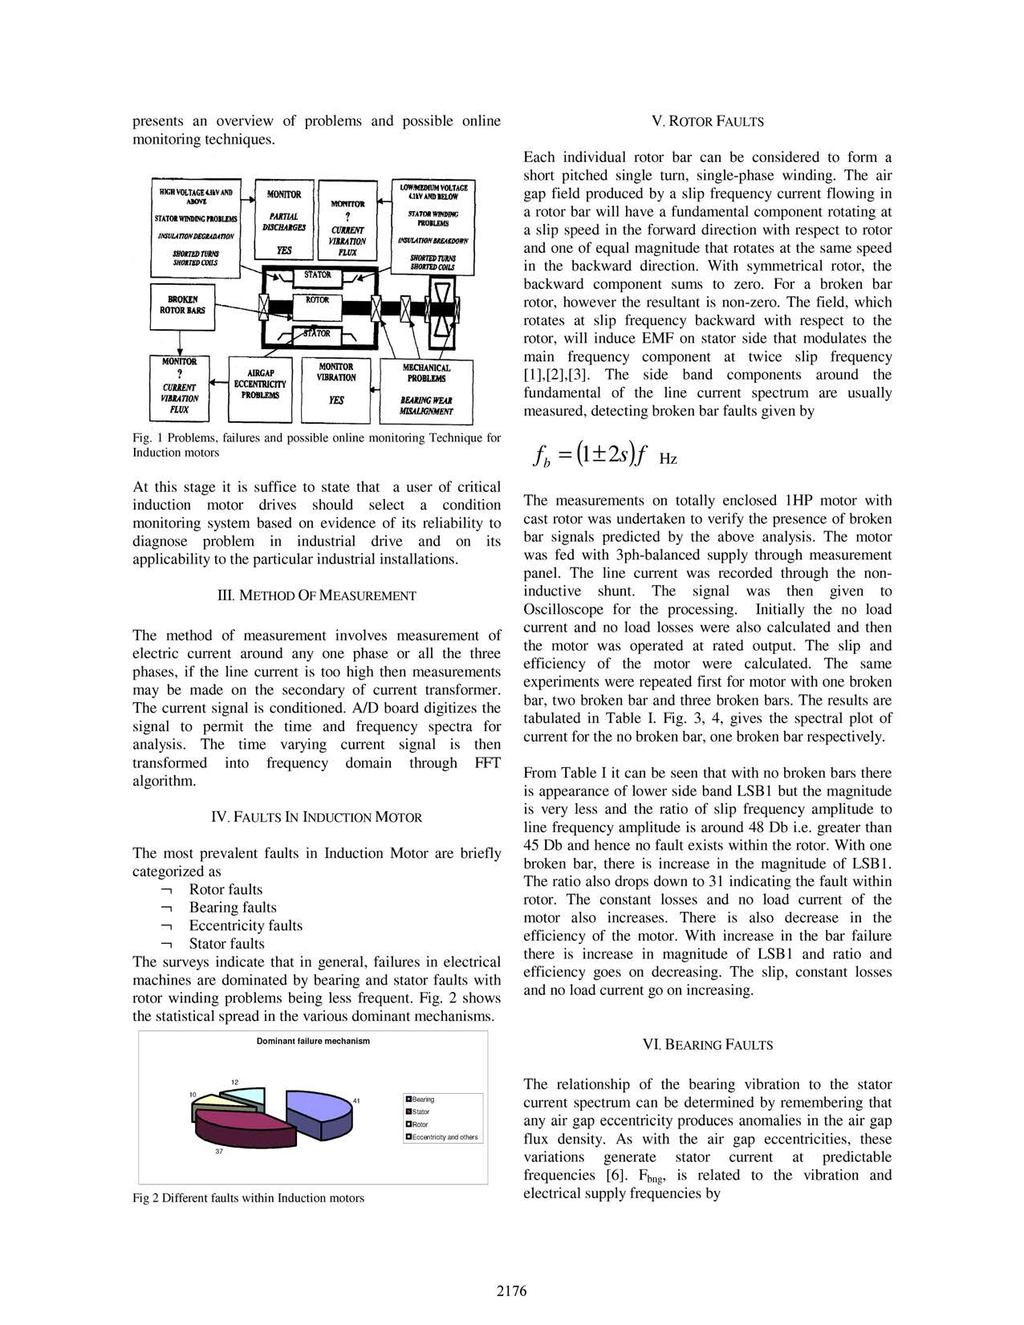 presents an overview of problems and possible online monitoring techniques....irgap MONOR MECHANICAL CU?r ECC~ThICJTY CCENMRCtTY VIBRATION PROBLEMS VIBJATION P YES ARWING #W FLUX.L M IGNMEN Fig.